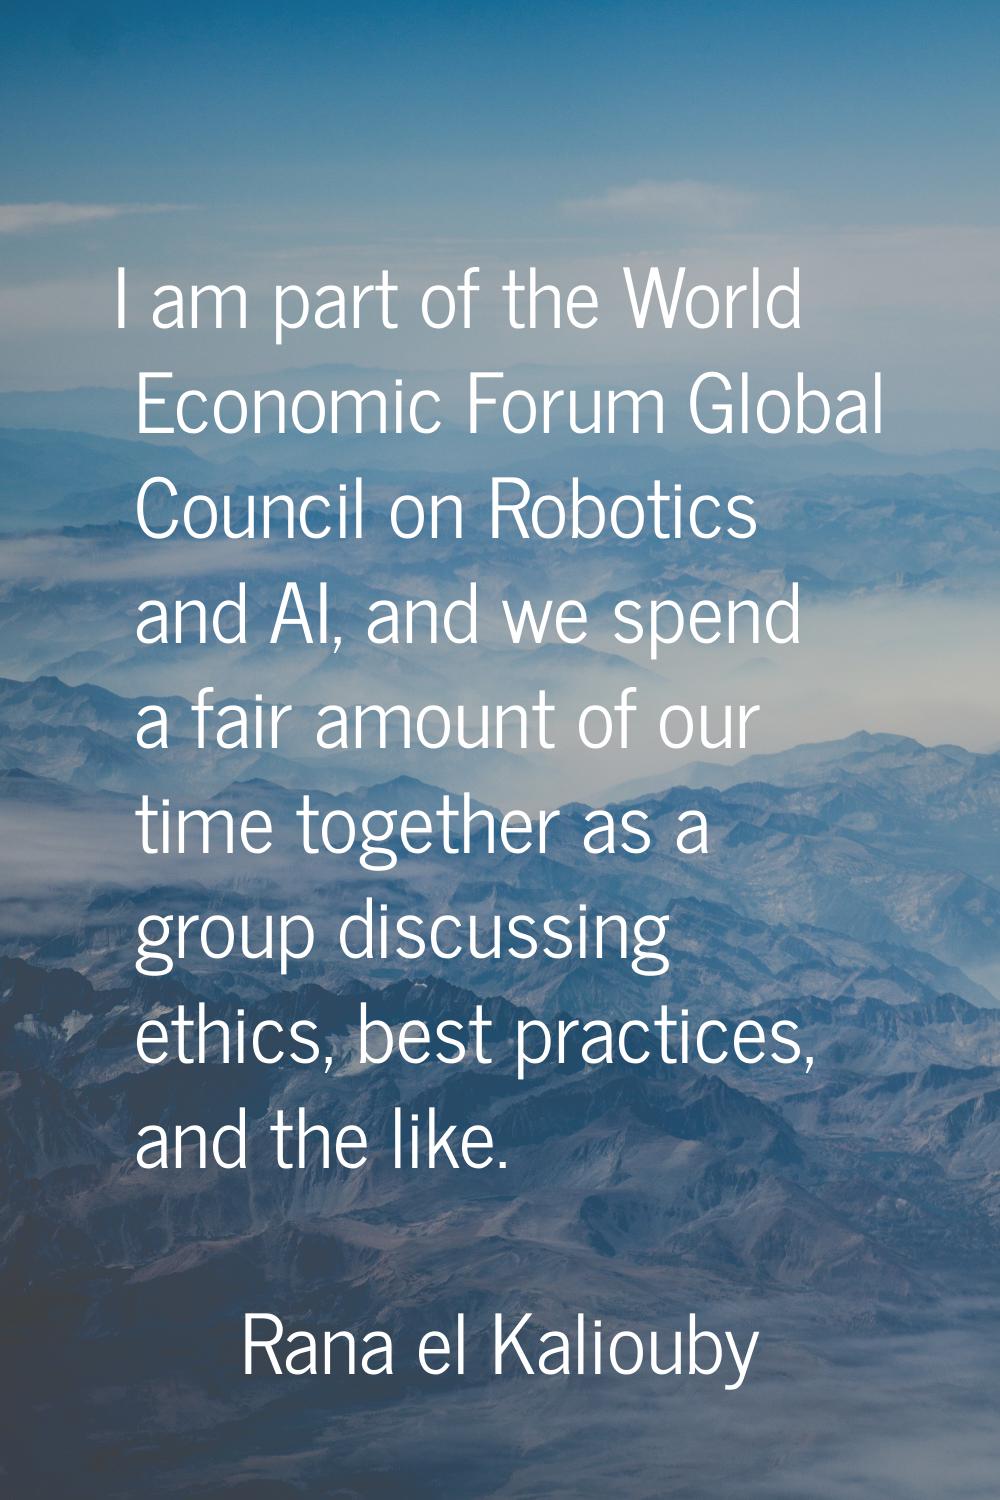 I am part of the World Economic Forum Global Council on Robotics and AI, and we spend a fair amount